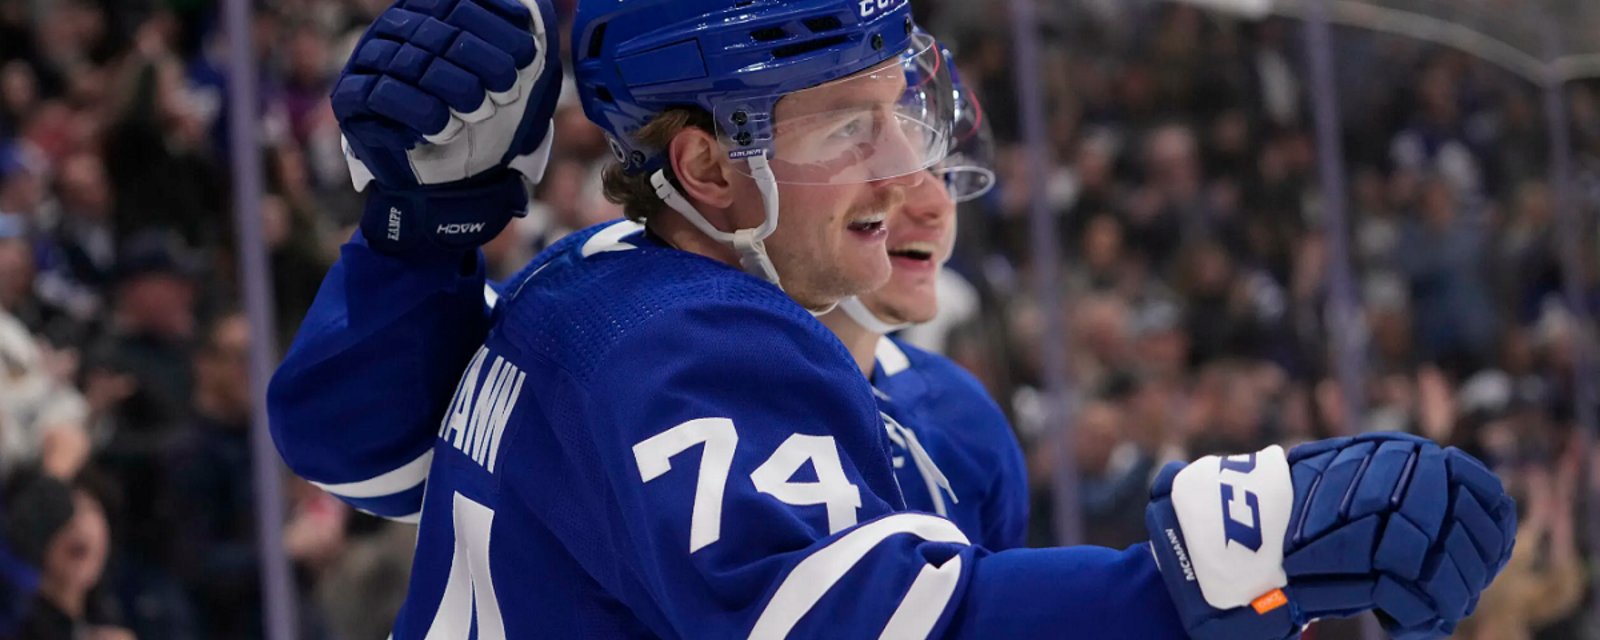 Maple Leafs lose two players to injury on Saturday night.